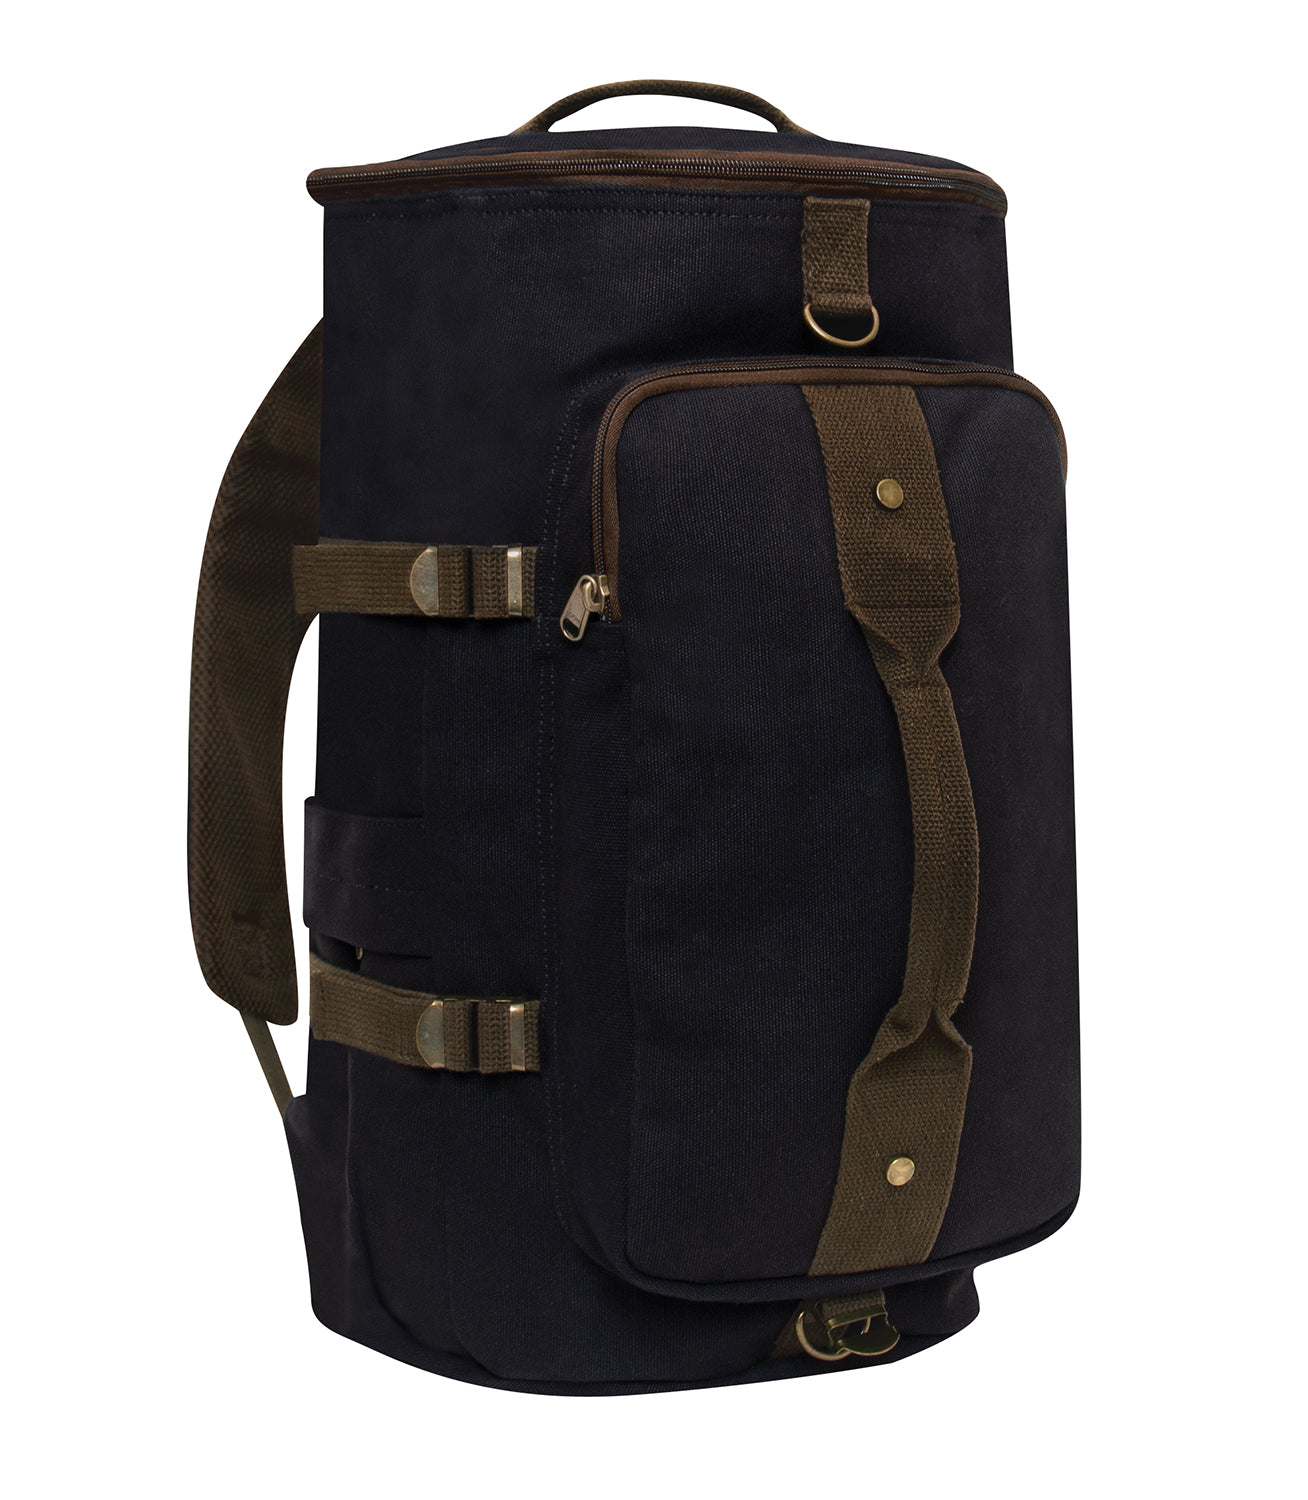 Convertible Canvas Duffle / Backpack - 19 Inches